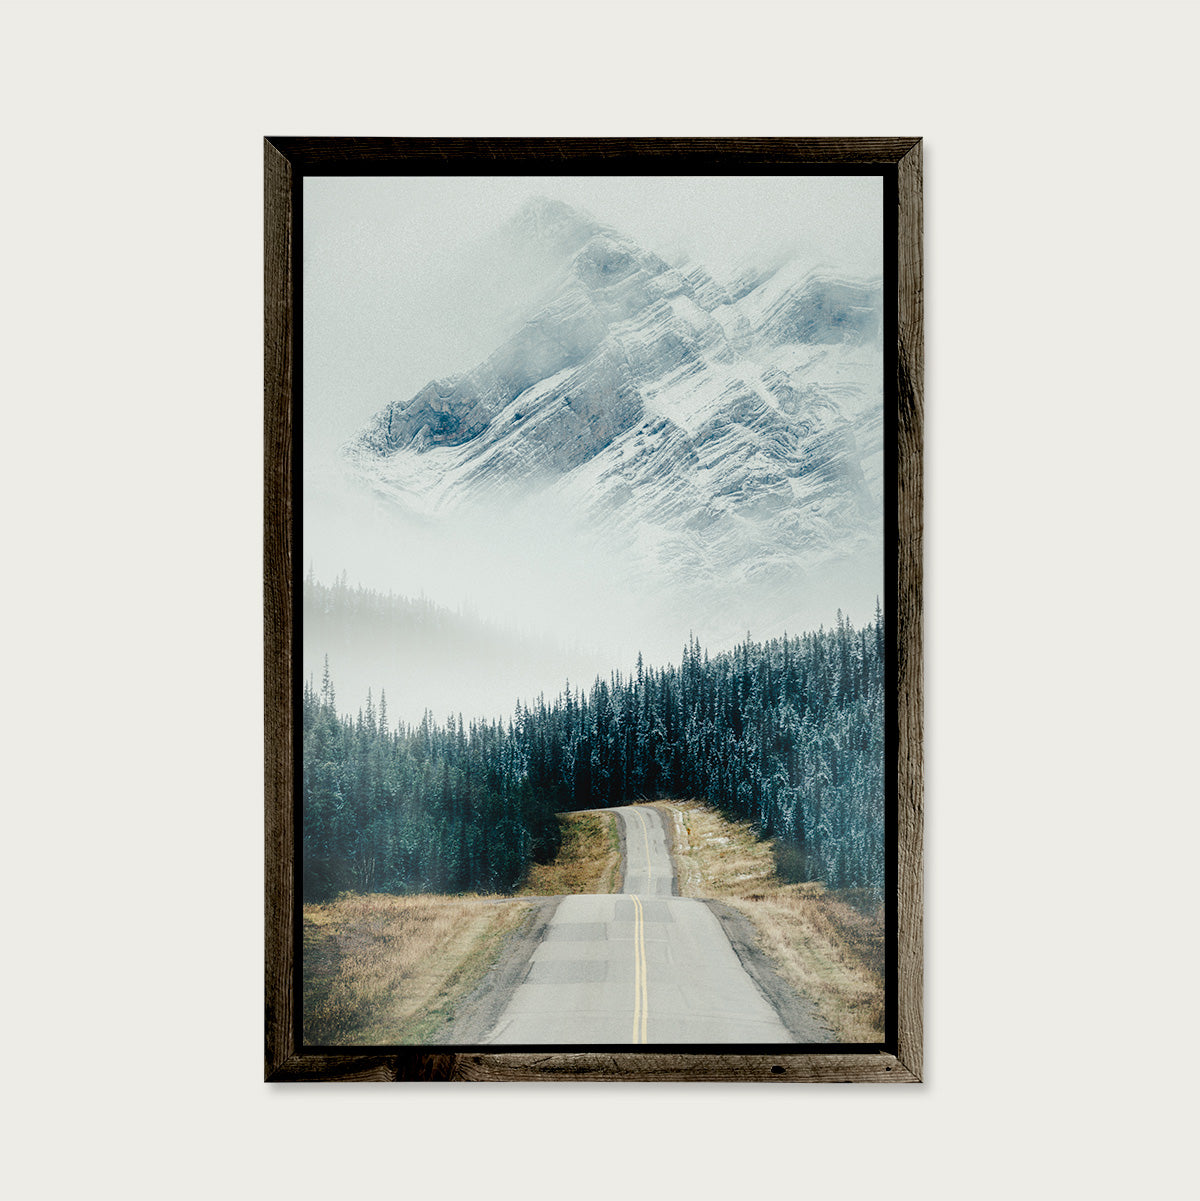 Mountain in the Clouds, Alaska Highway